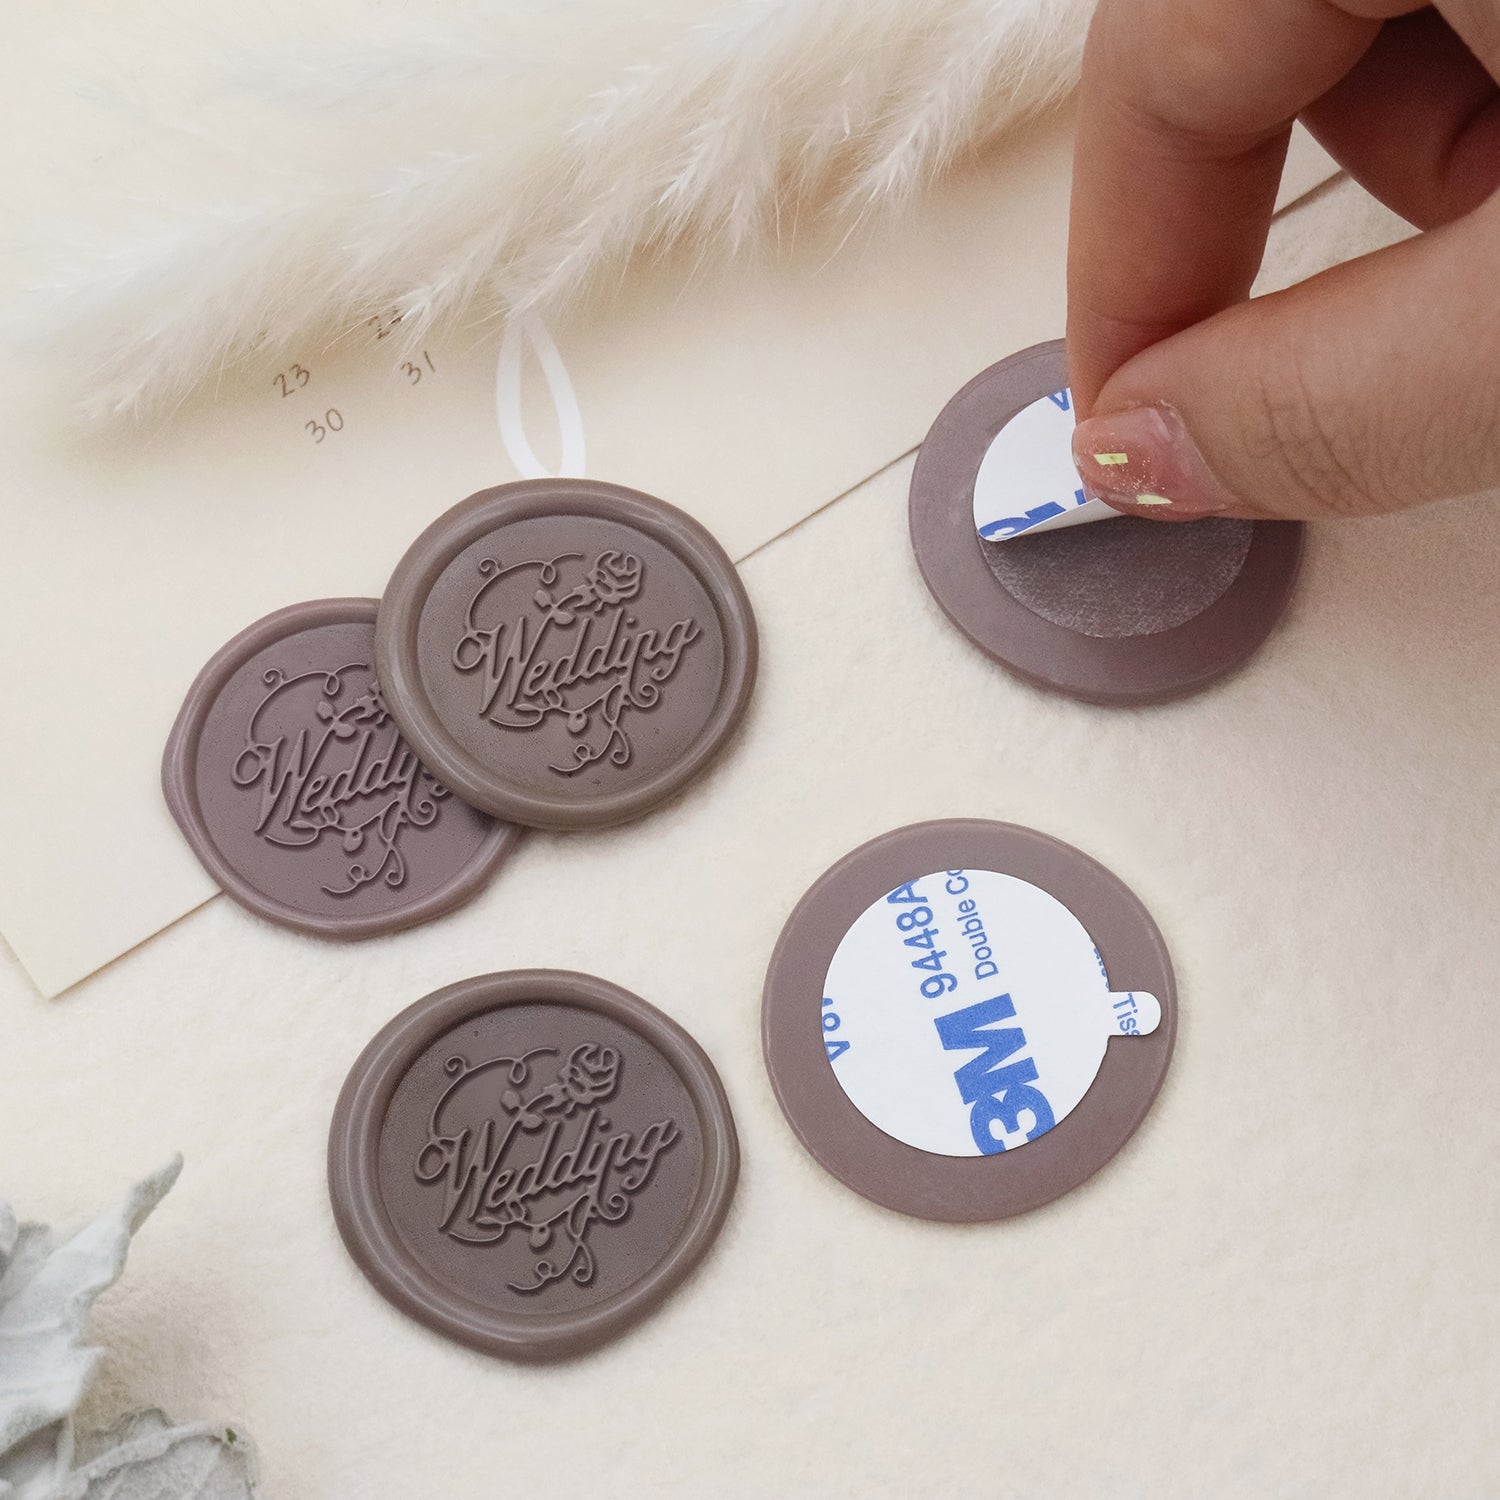 Ready Made Wax Seals Stickers - Greeting Self-Adhesive Wax Seal Stickers - Wedding